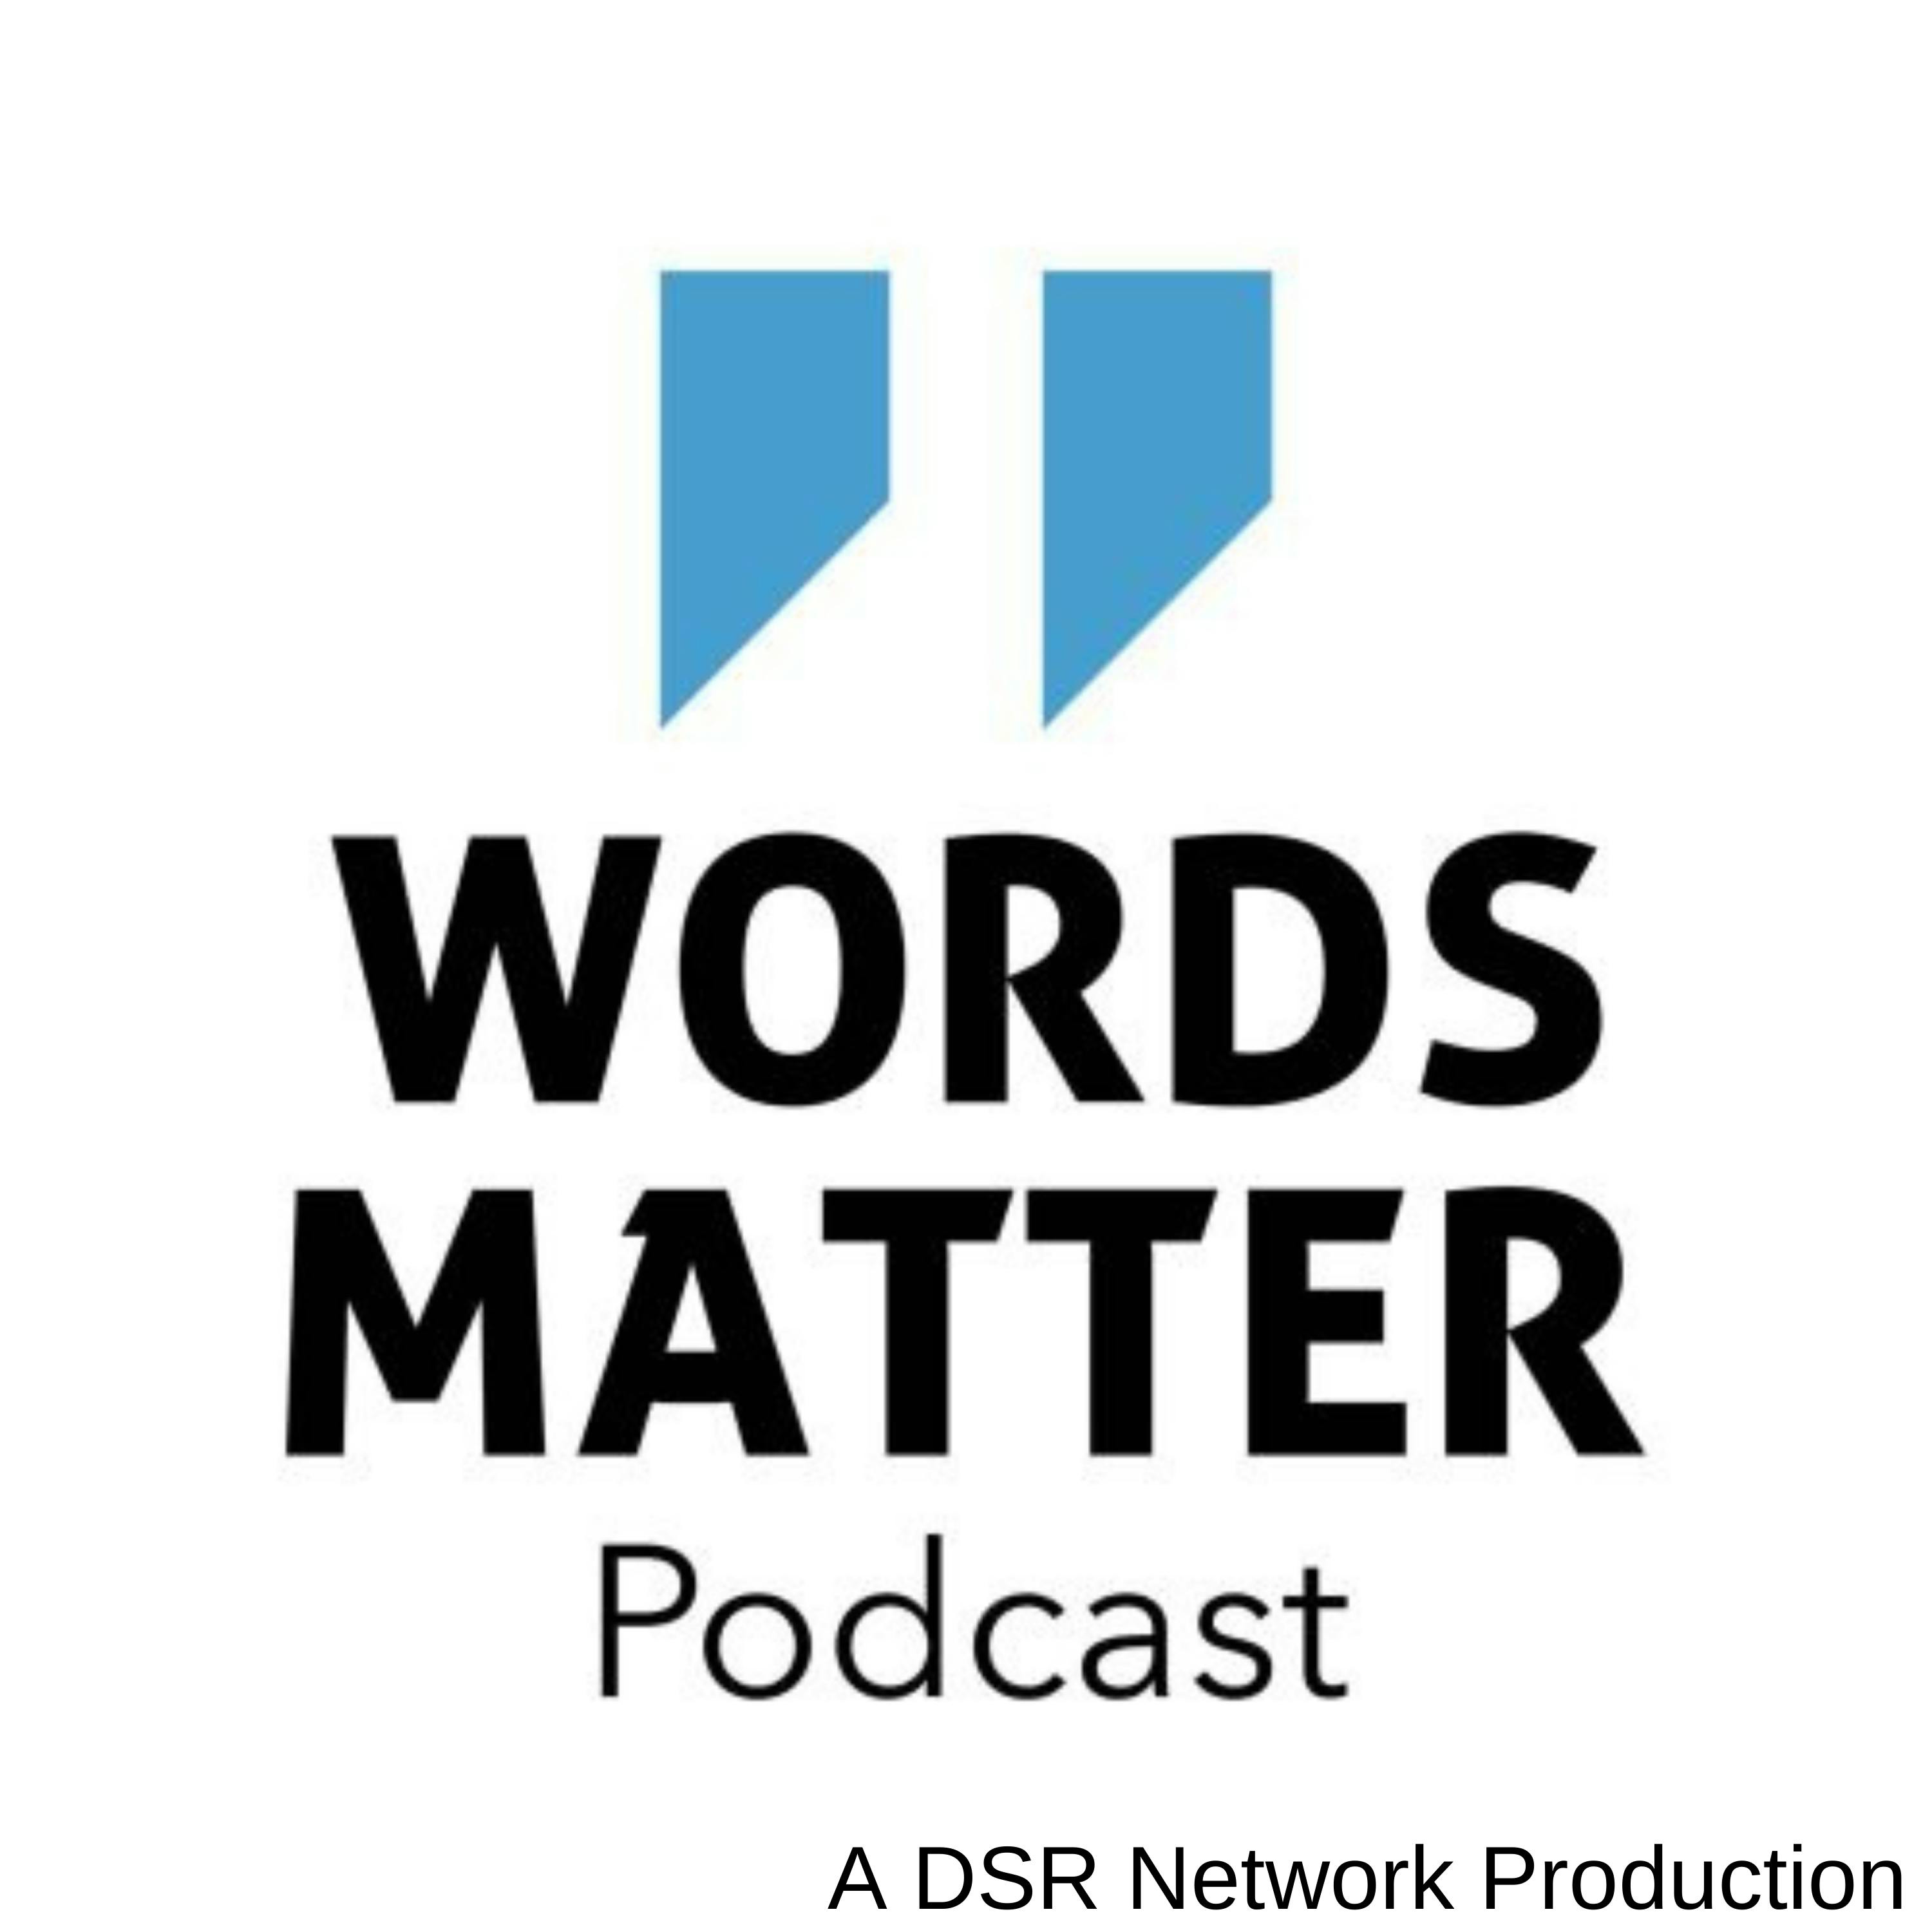 Words Matter: What Happens When Leaders Don’t Lead